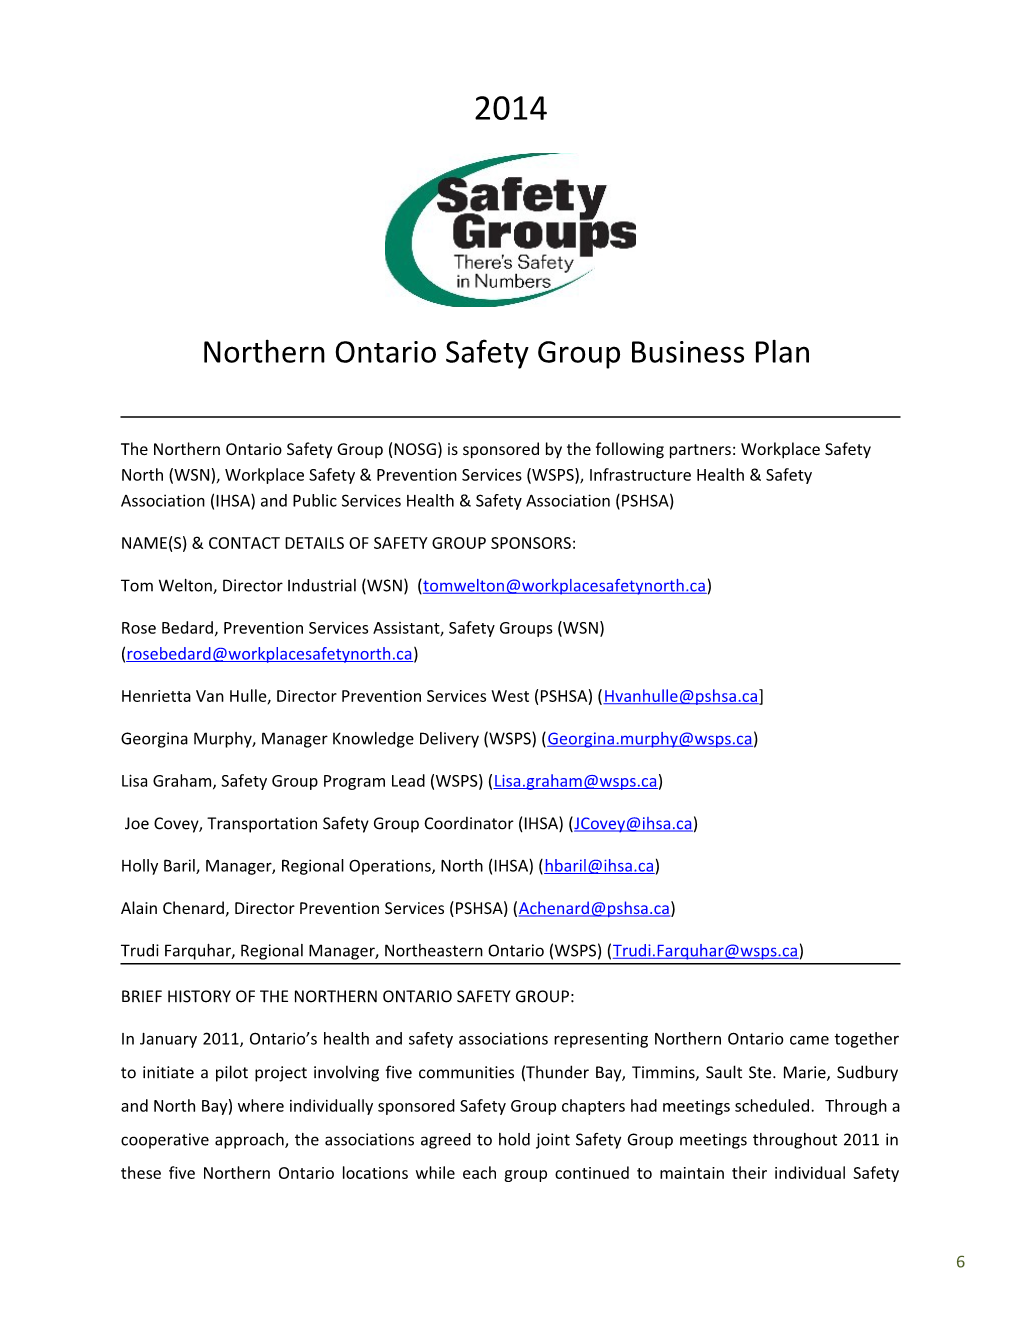 Northern Ontario Safety Group Business Plan